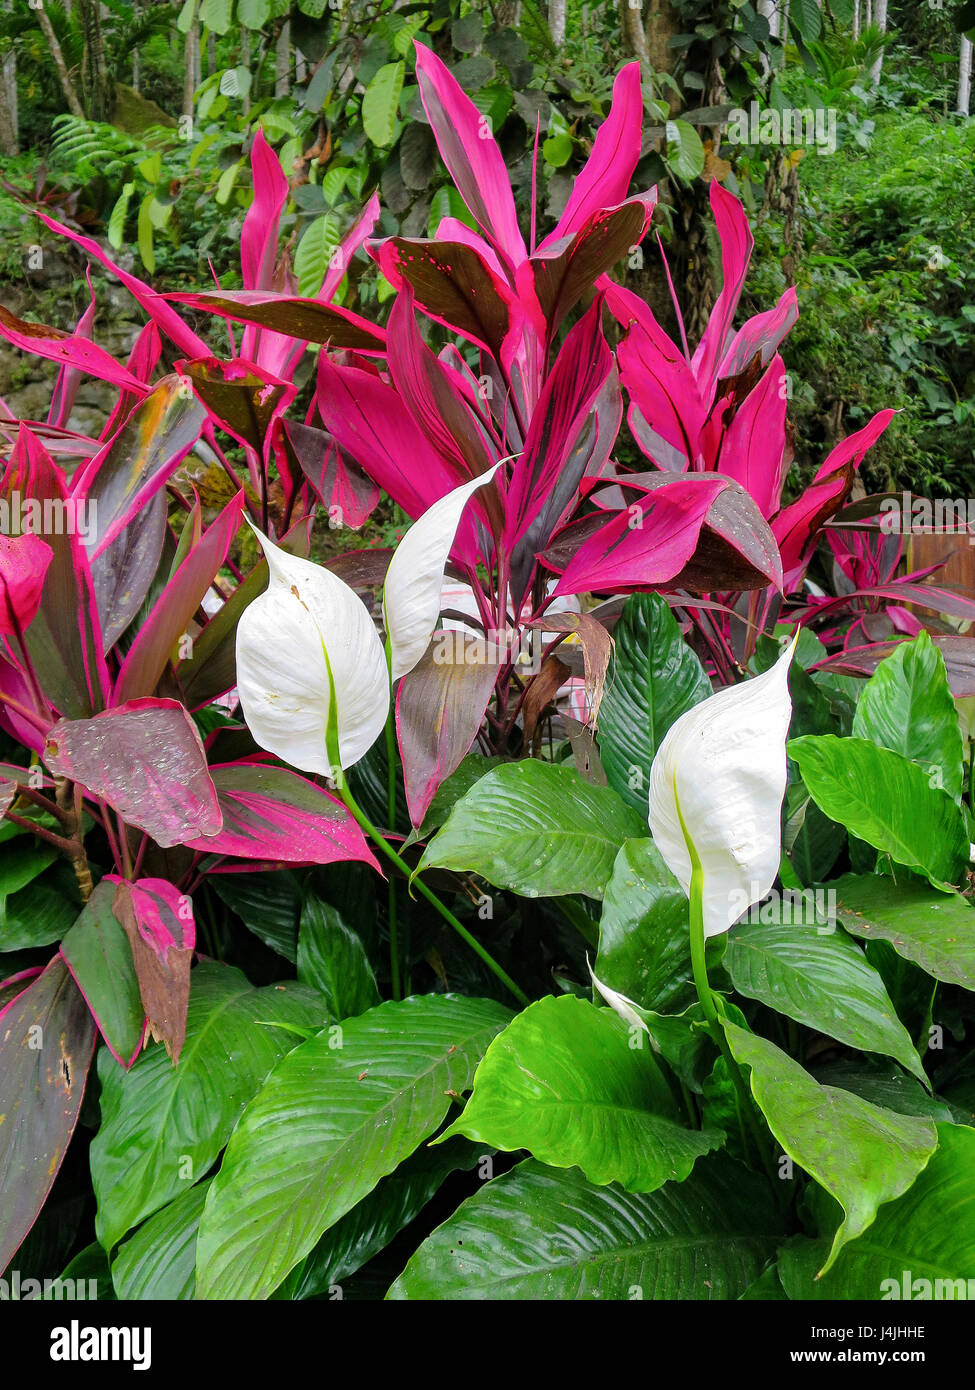 Peace lily, Spathiphyllum cochlearispathum, a.k.a. White Sails and Spathe Flower with Red-leaved Ti plants, Cordyline fruticosa, a.k.a. Hawaiian Ti, C Stock Photo